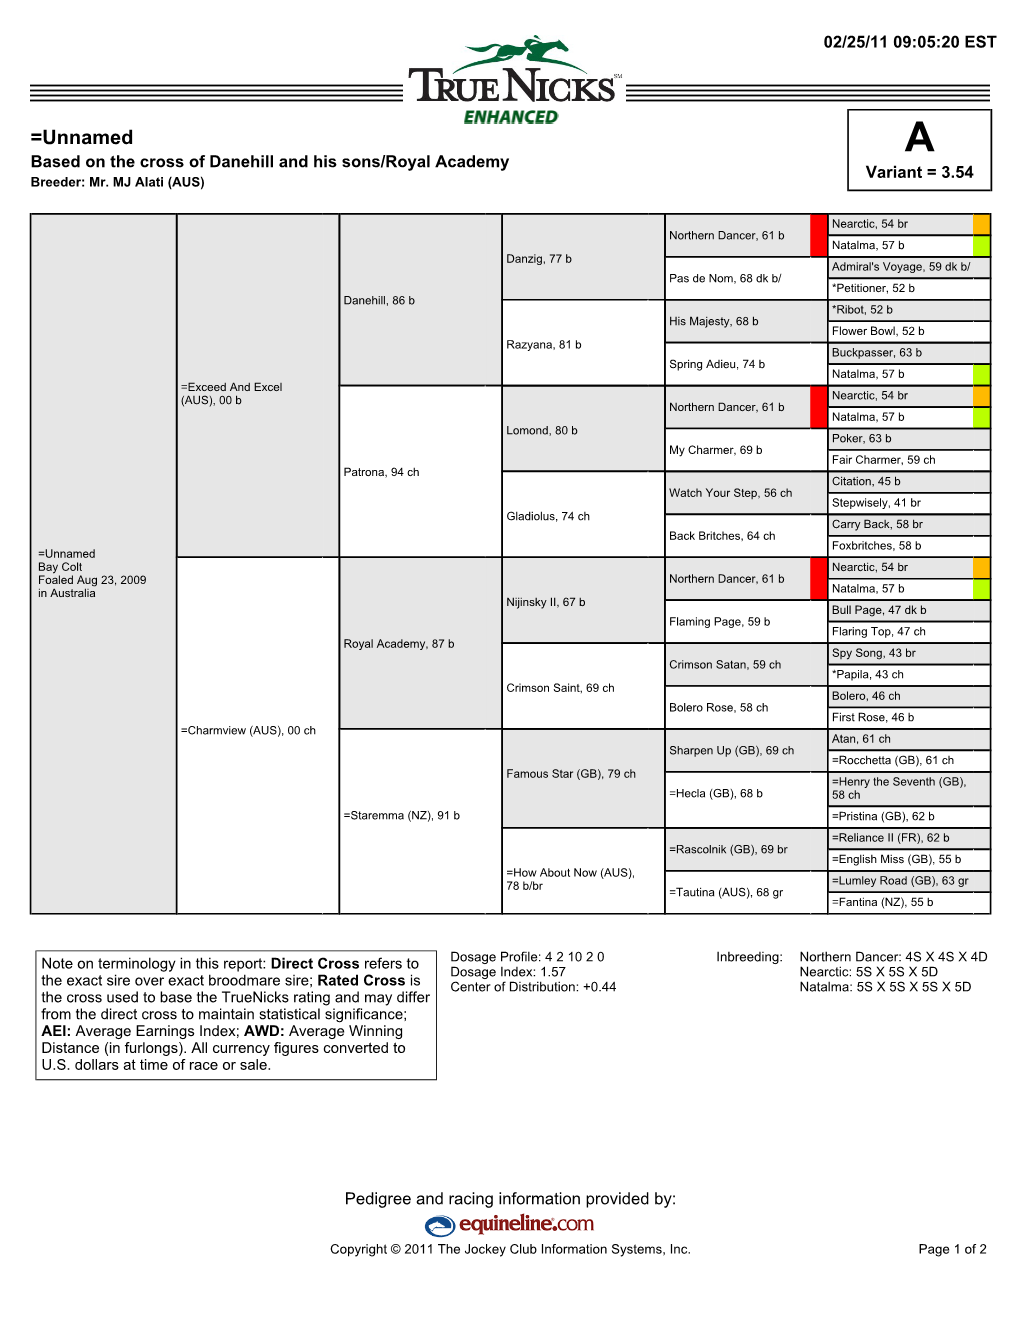 =Unnamed a Based on the Cross of Danehill and His Sons/Royal Academy Variant = 3.54 Breeder: Mr